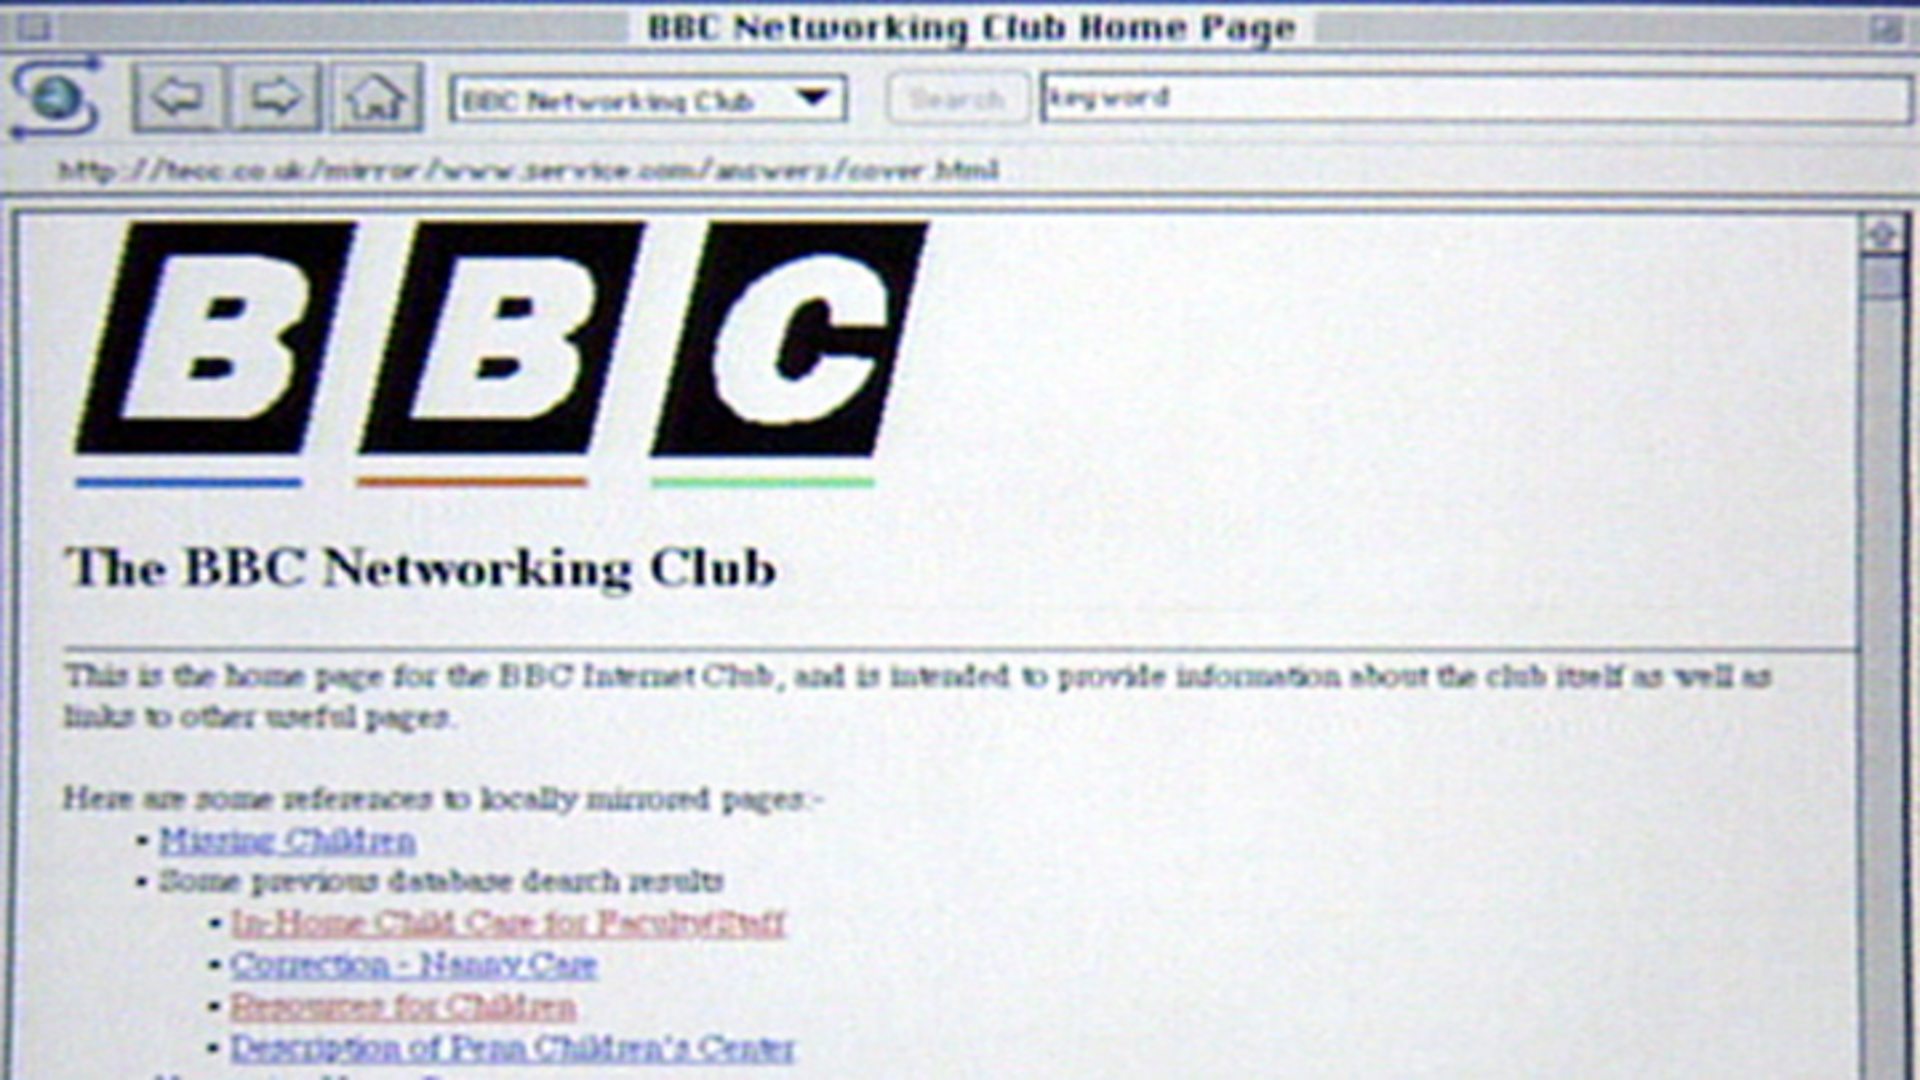 Launch of BBC Networking Club - History of the BBC